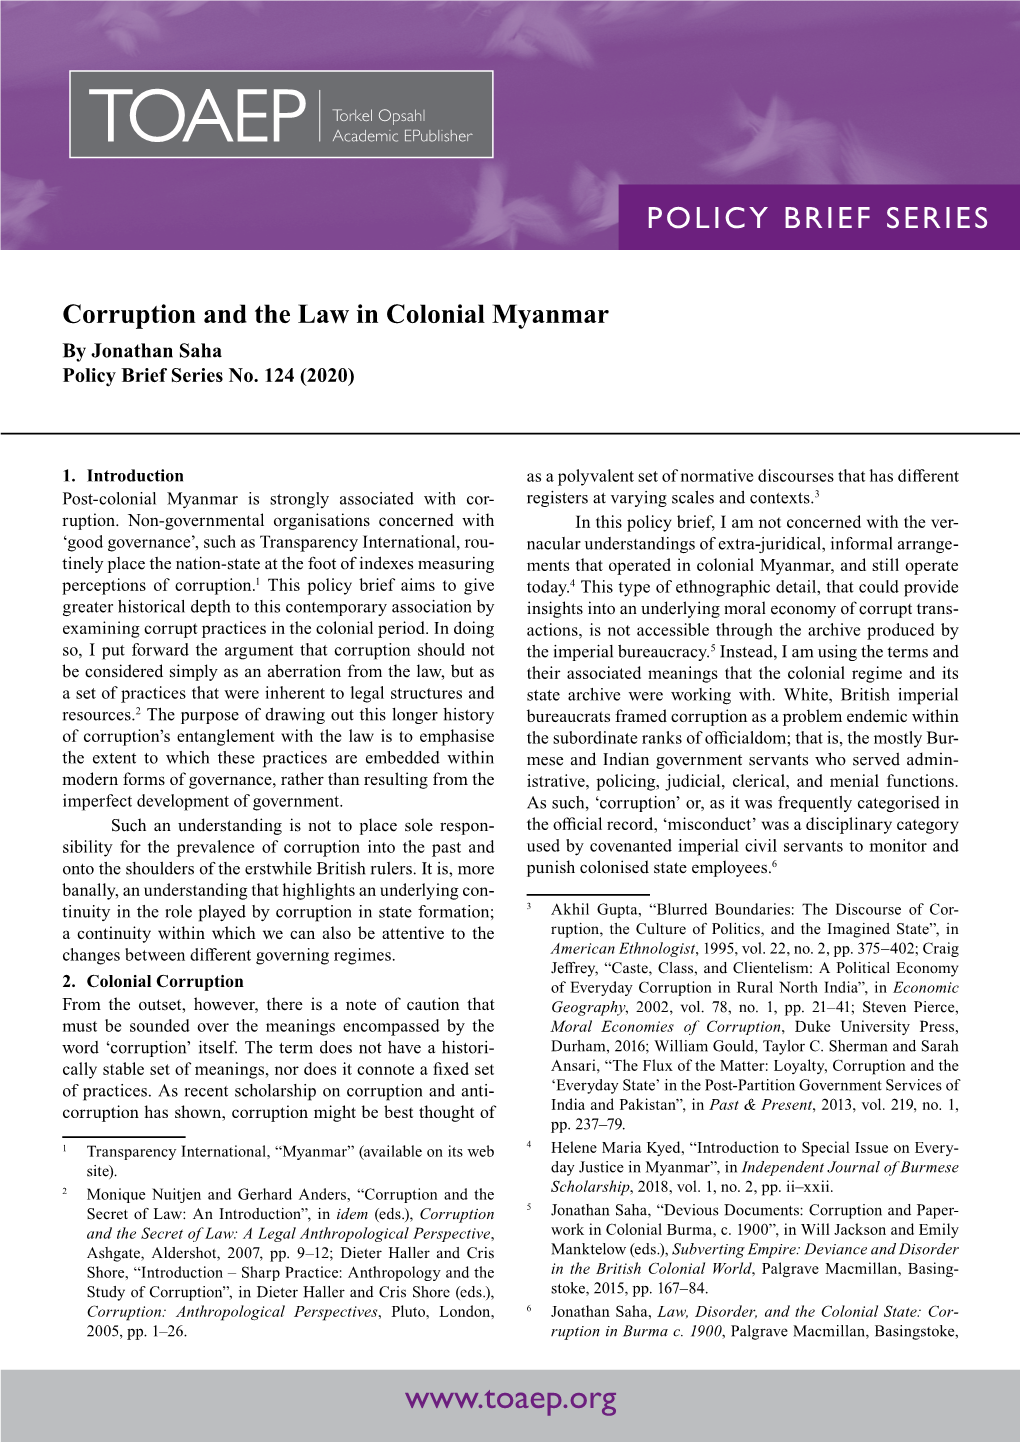 Corruption and the Law in Colonial Myanmar by Jonathan Saha Policy Brief Series No